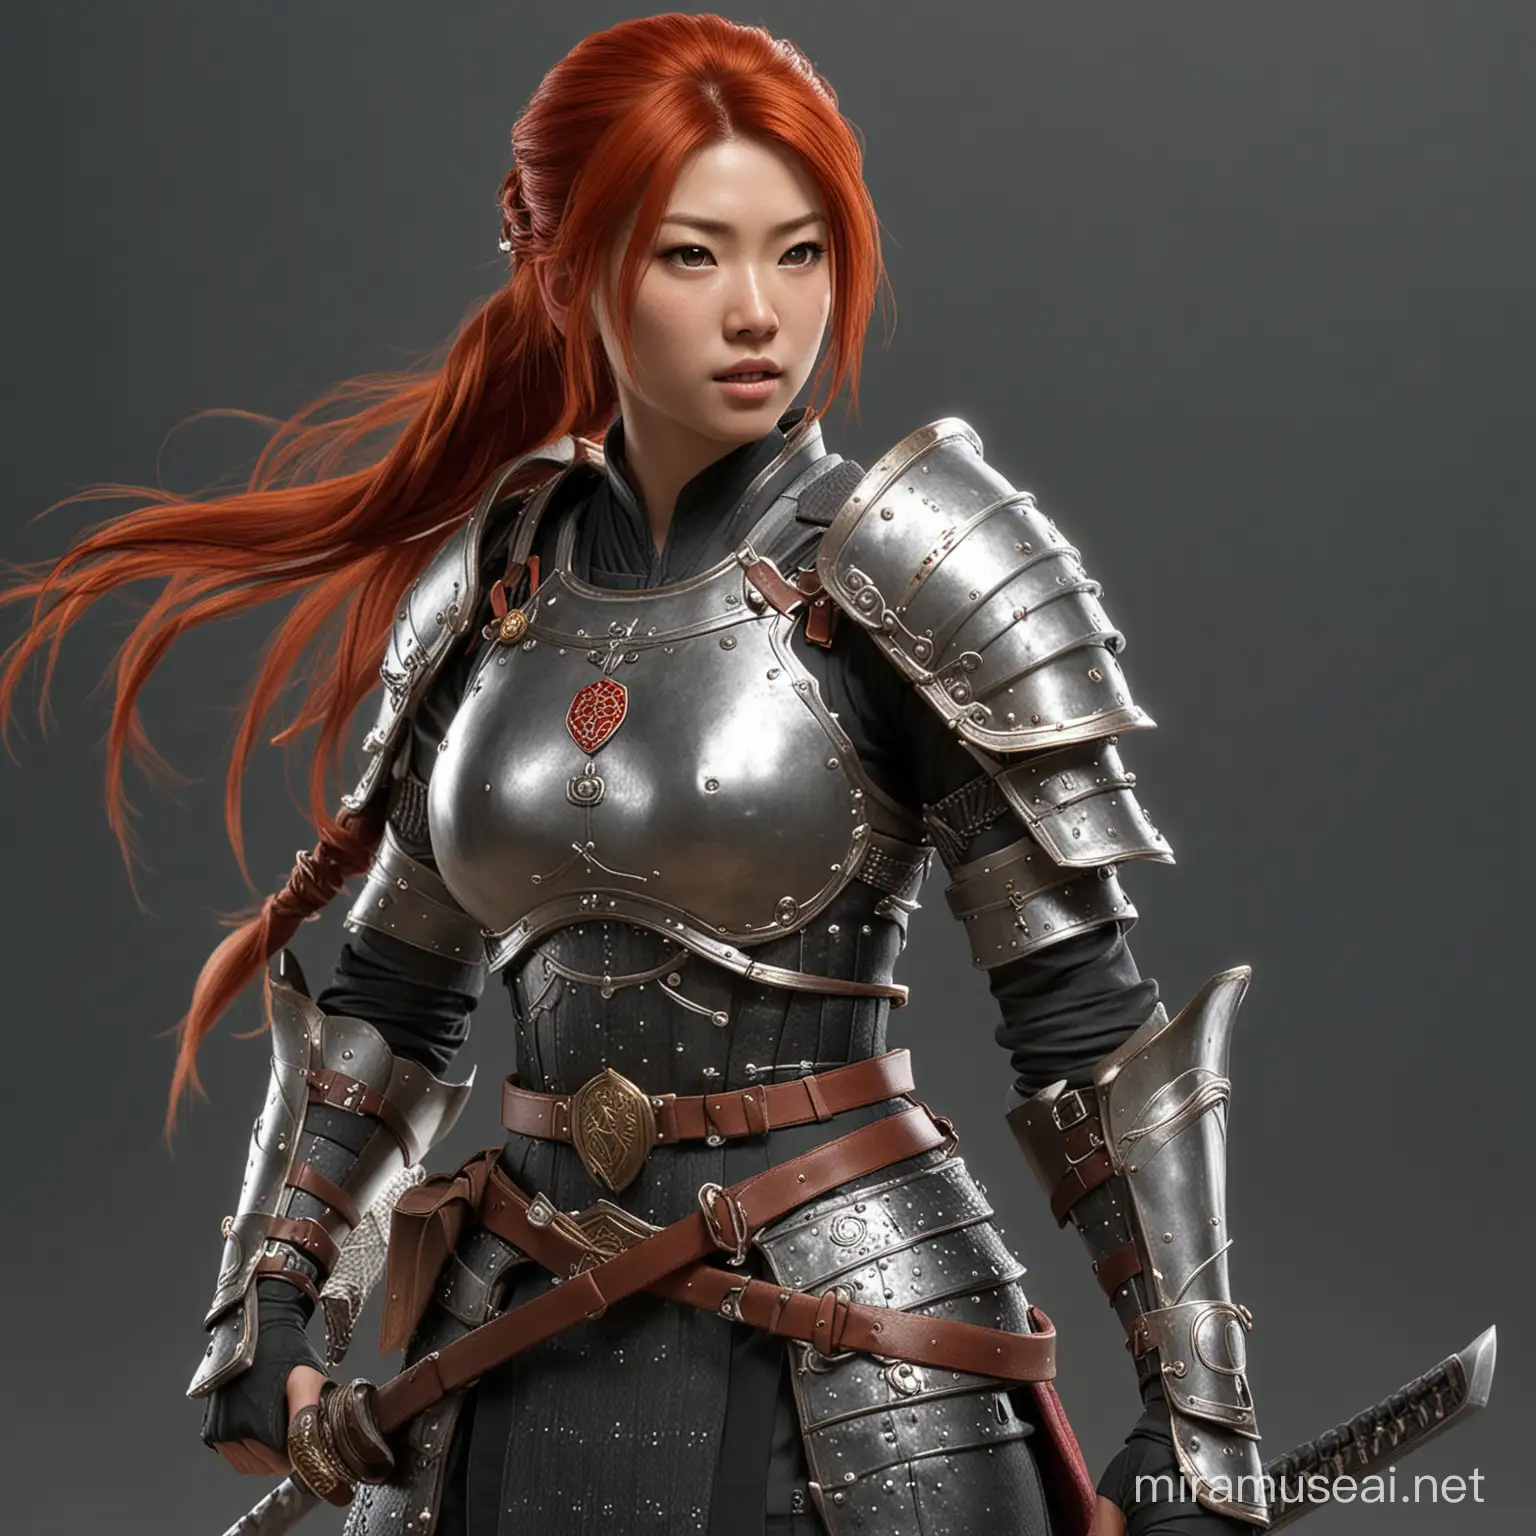 Generate a red haired female asian cleric of 18 year old wearing splint mail armor and wielding a steel shield and a katana